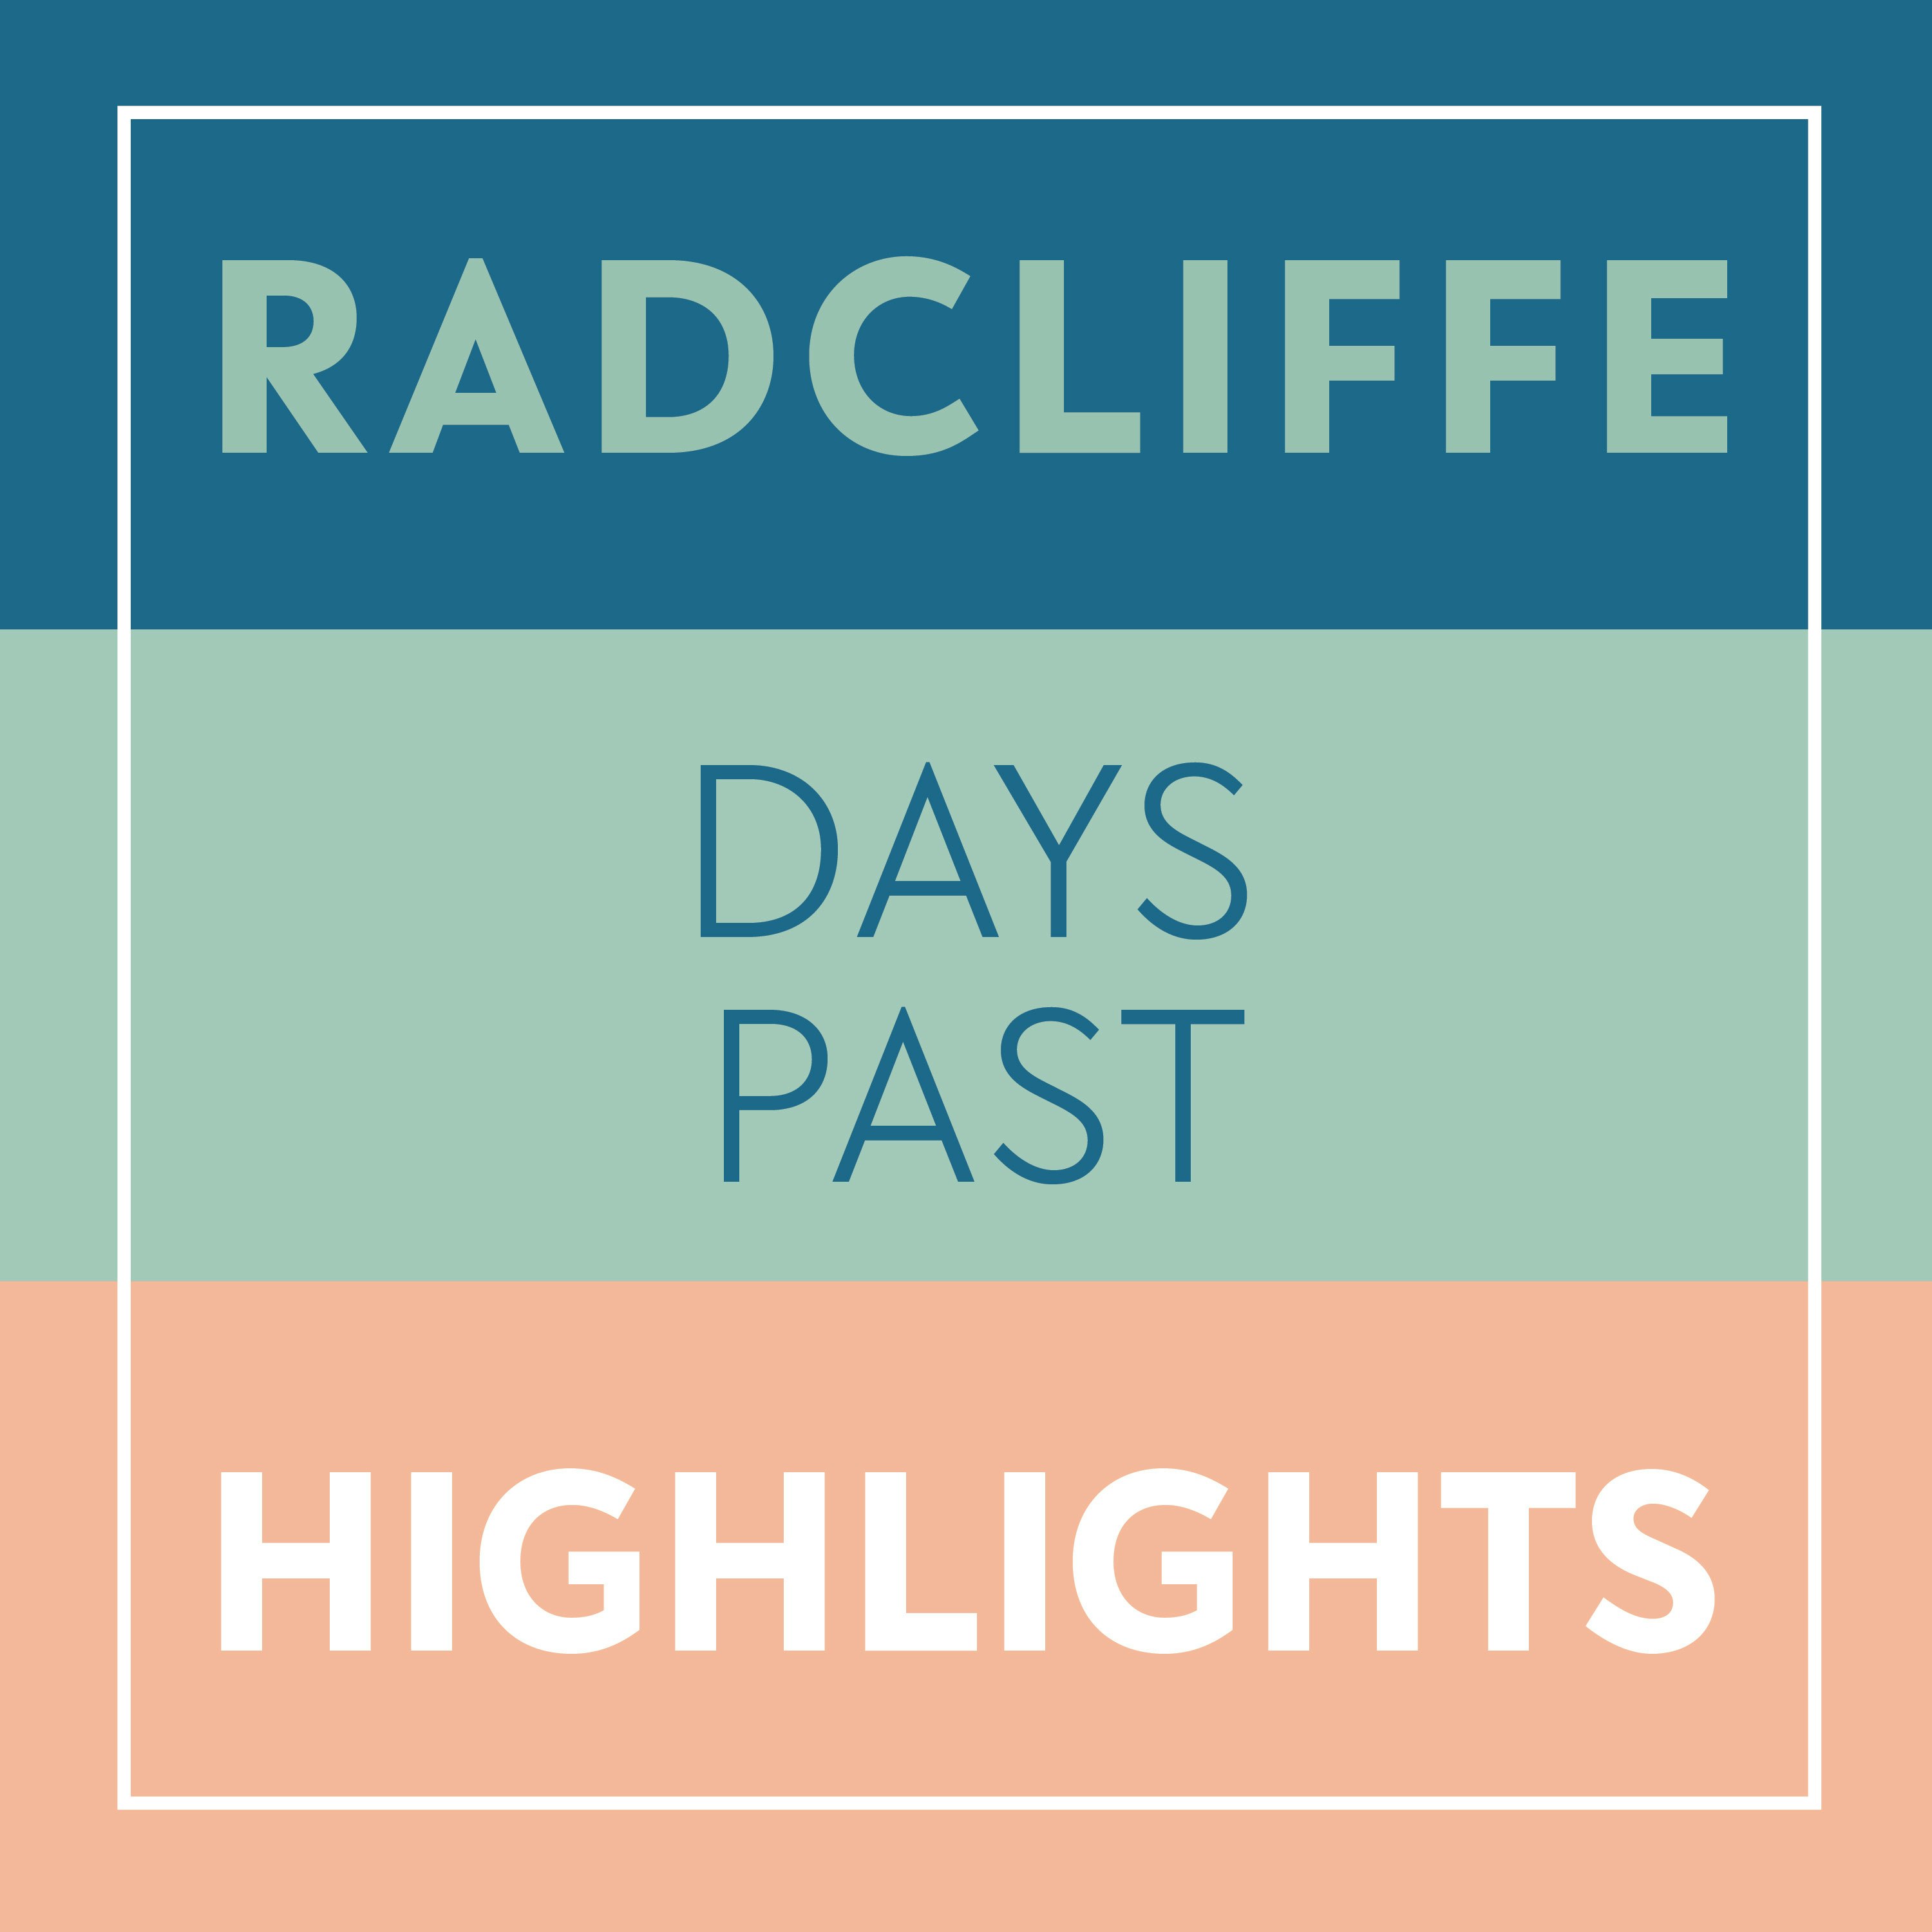 Radcliffe Highlights